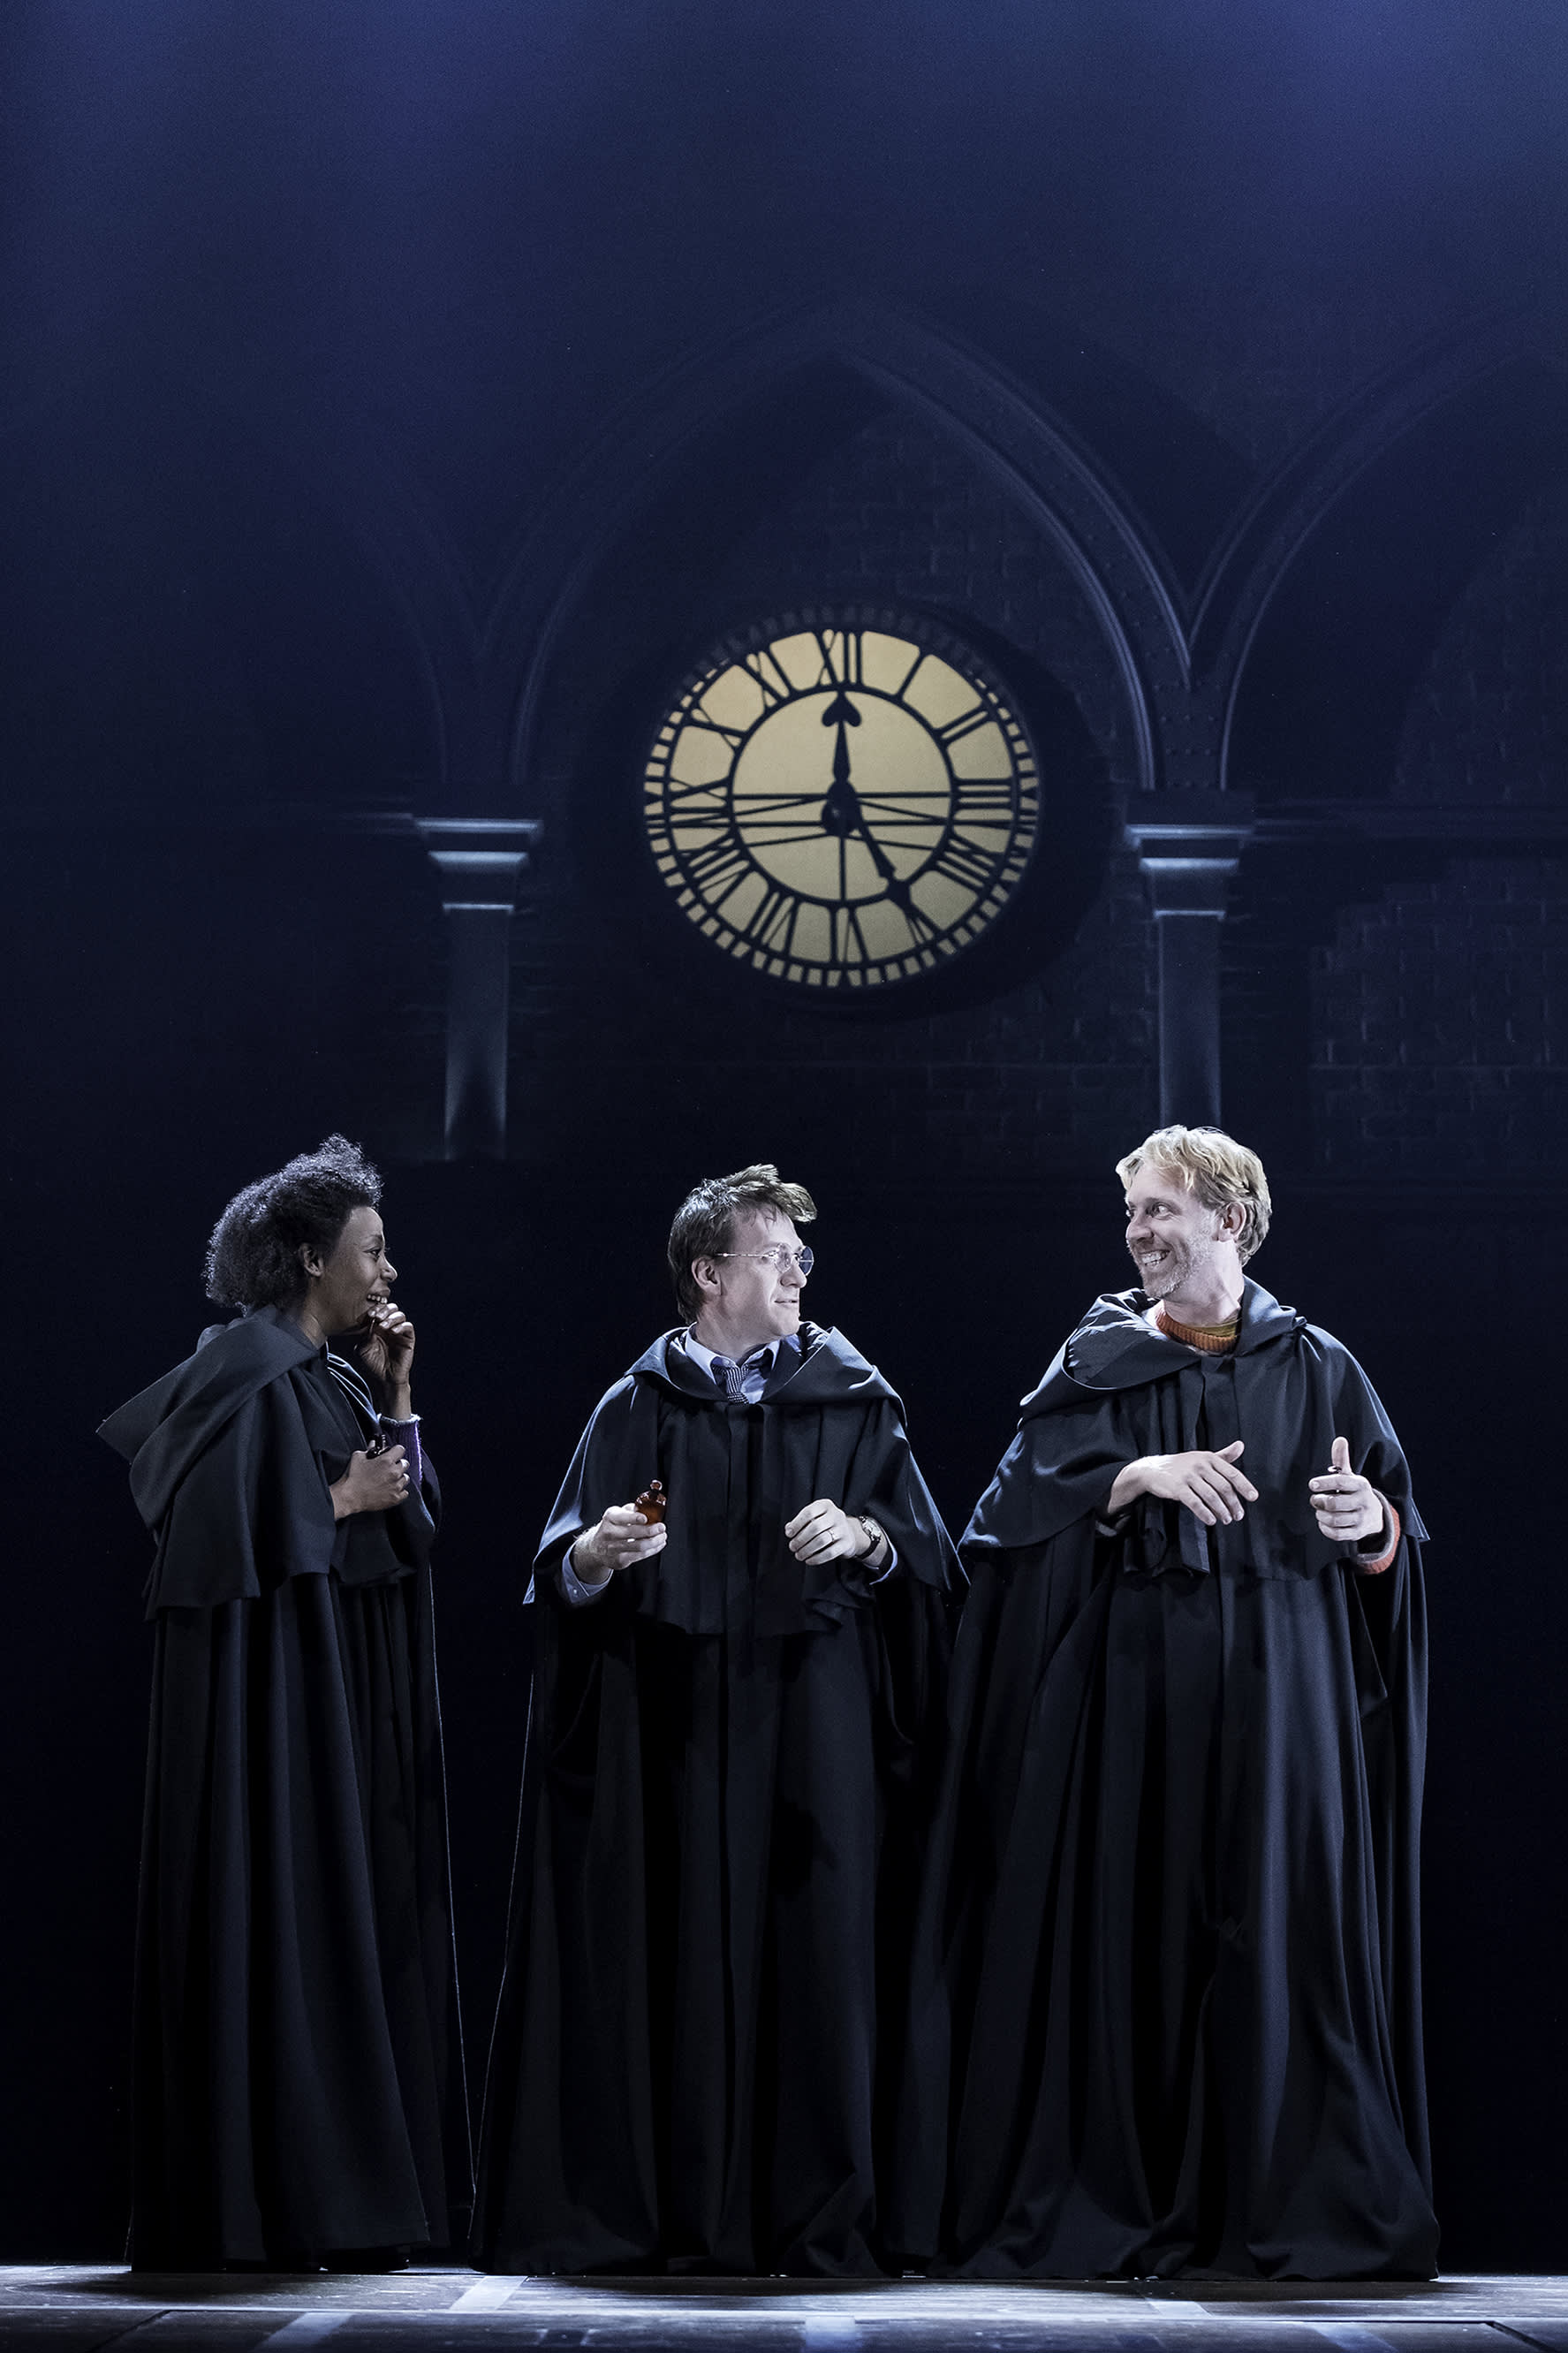 Hermione, Harry and Ron wearing robes, from Harry Potter and the Cursed Child